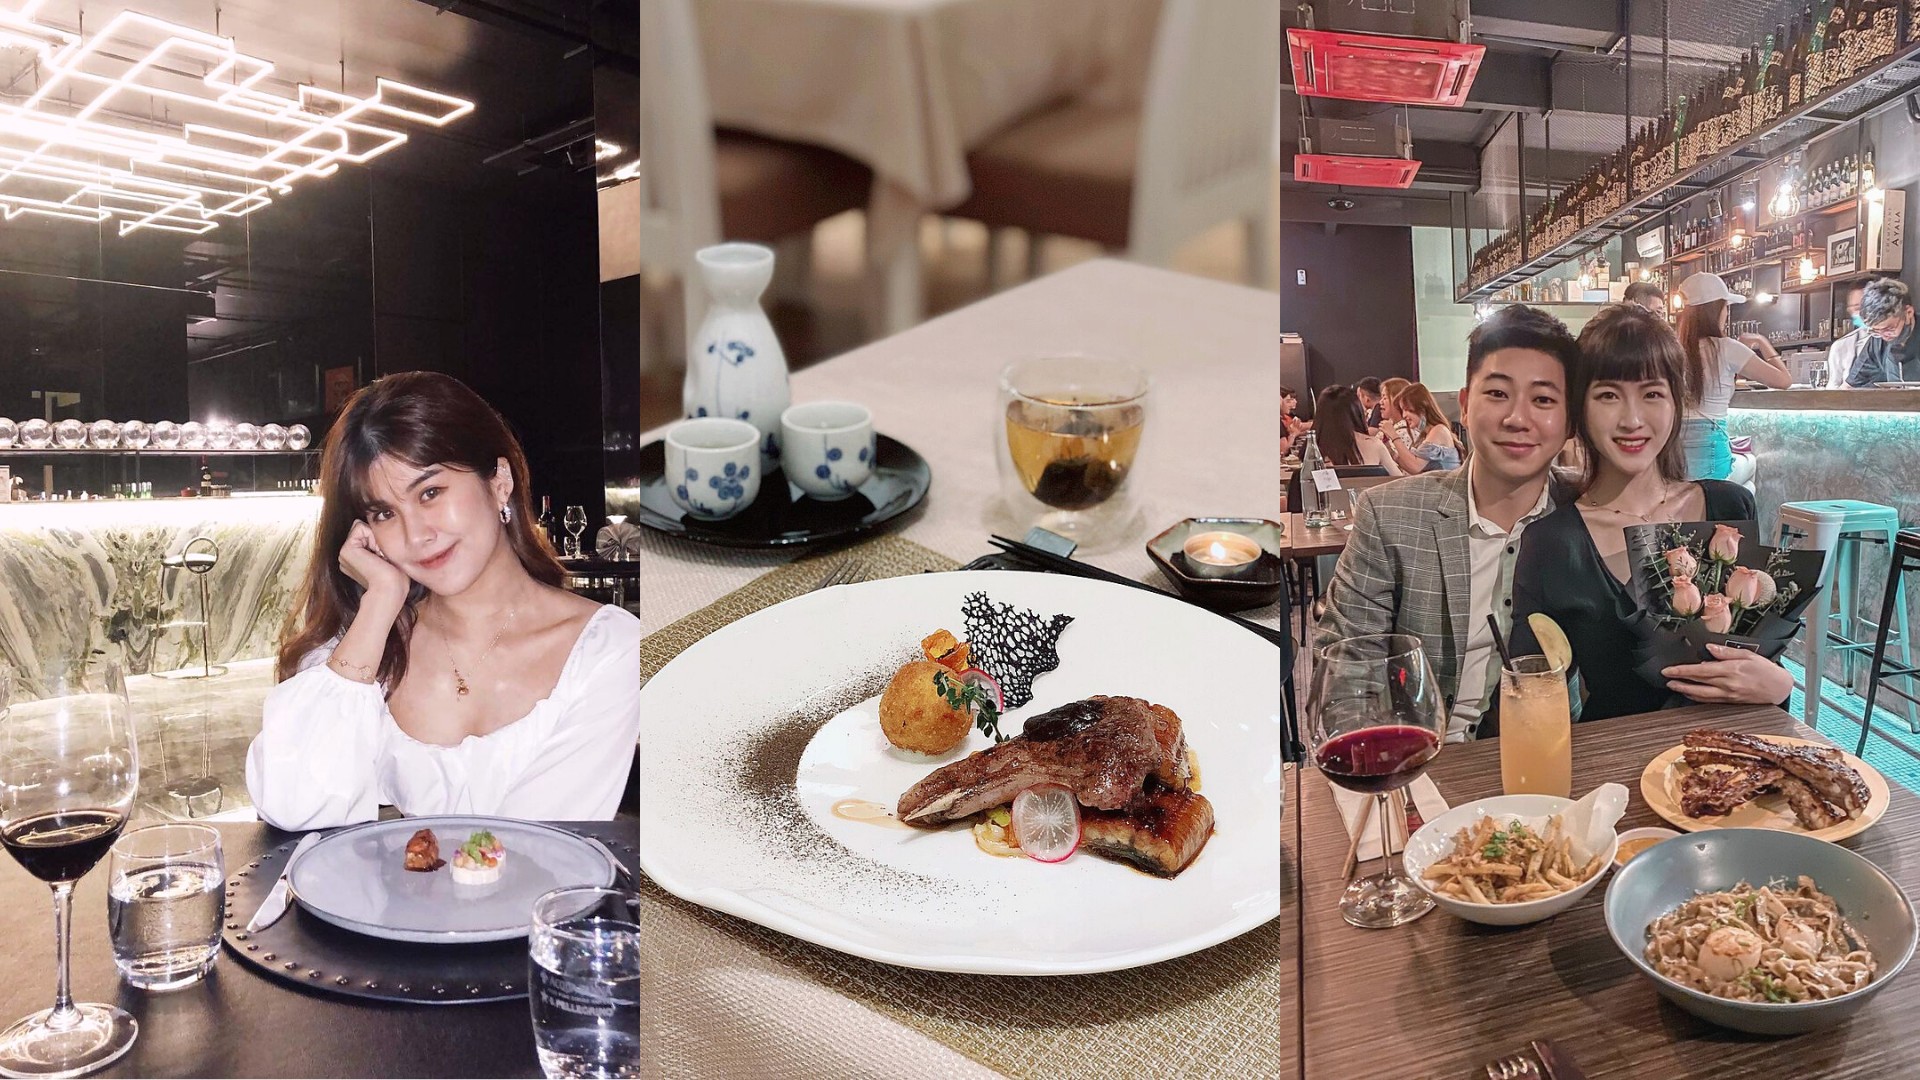 13 Best Fine Dining Restaurants In Penang 2021: From Upscale Venues To